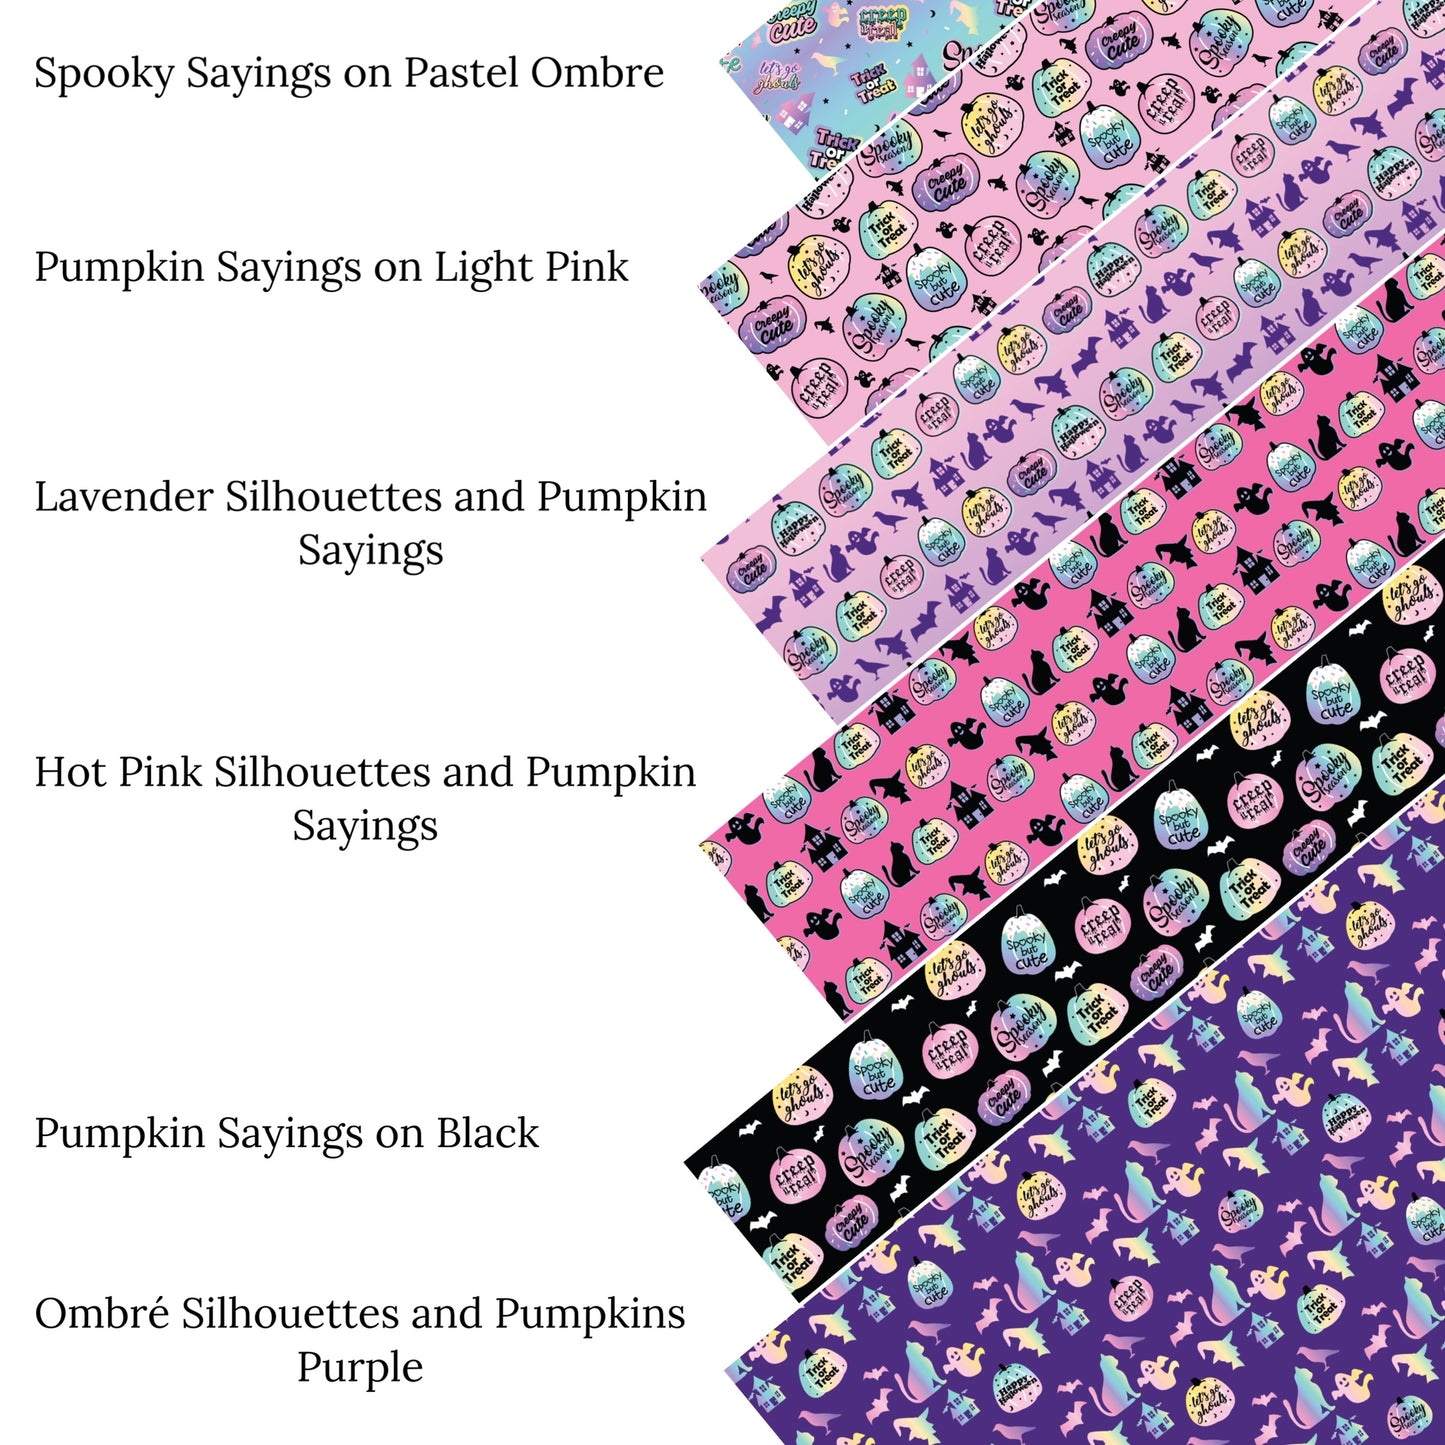 Ombre Silhouettes and Pumpkins Purple Faux Leather Sheets